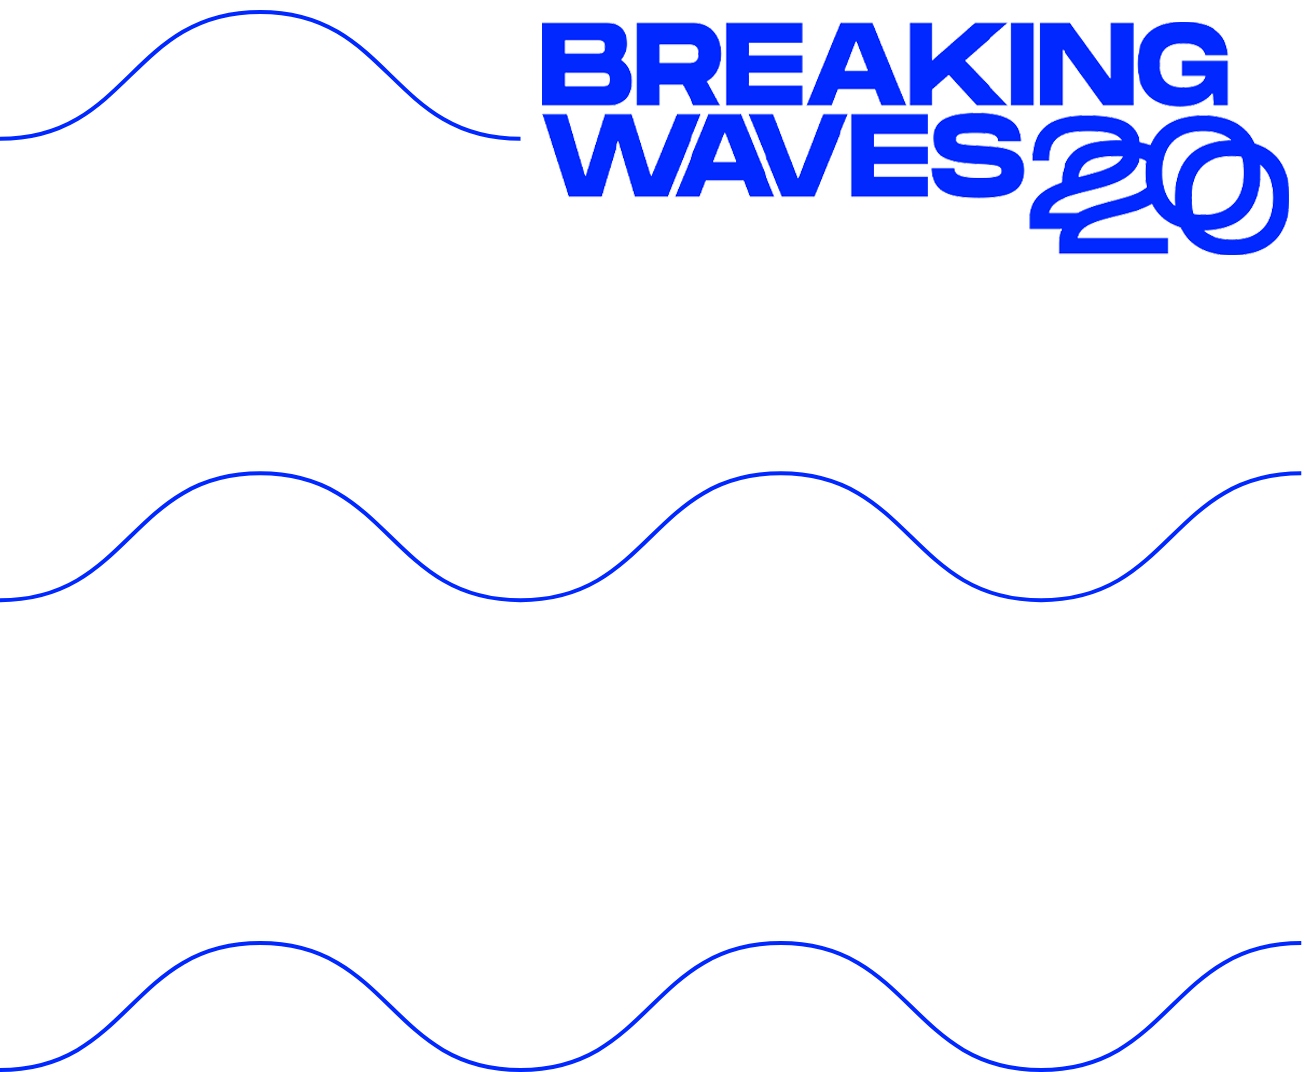 Conference timetable phase 2. - Breaking Waves 2020